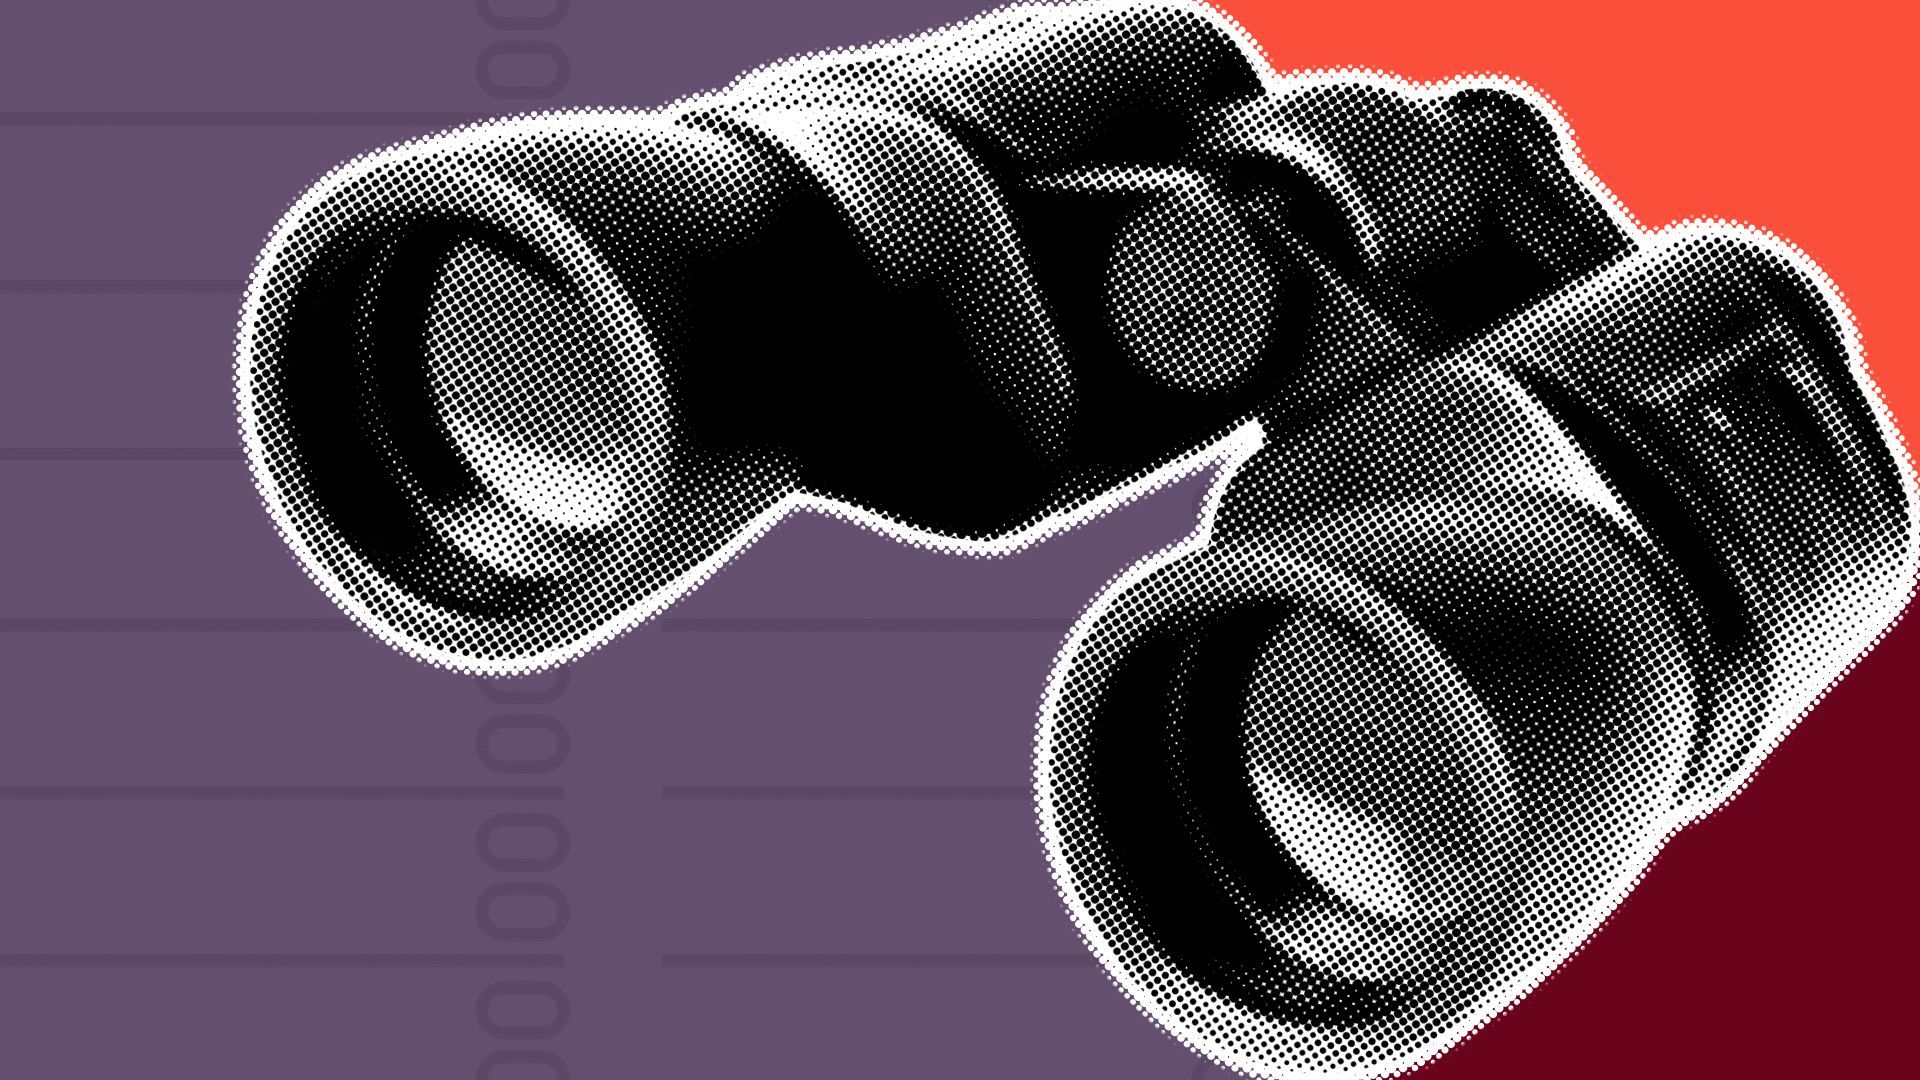 Illustration of binoculars in halftone set in front of bold colors and numbers